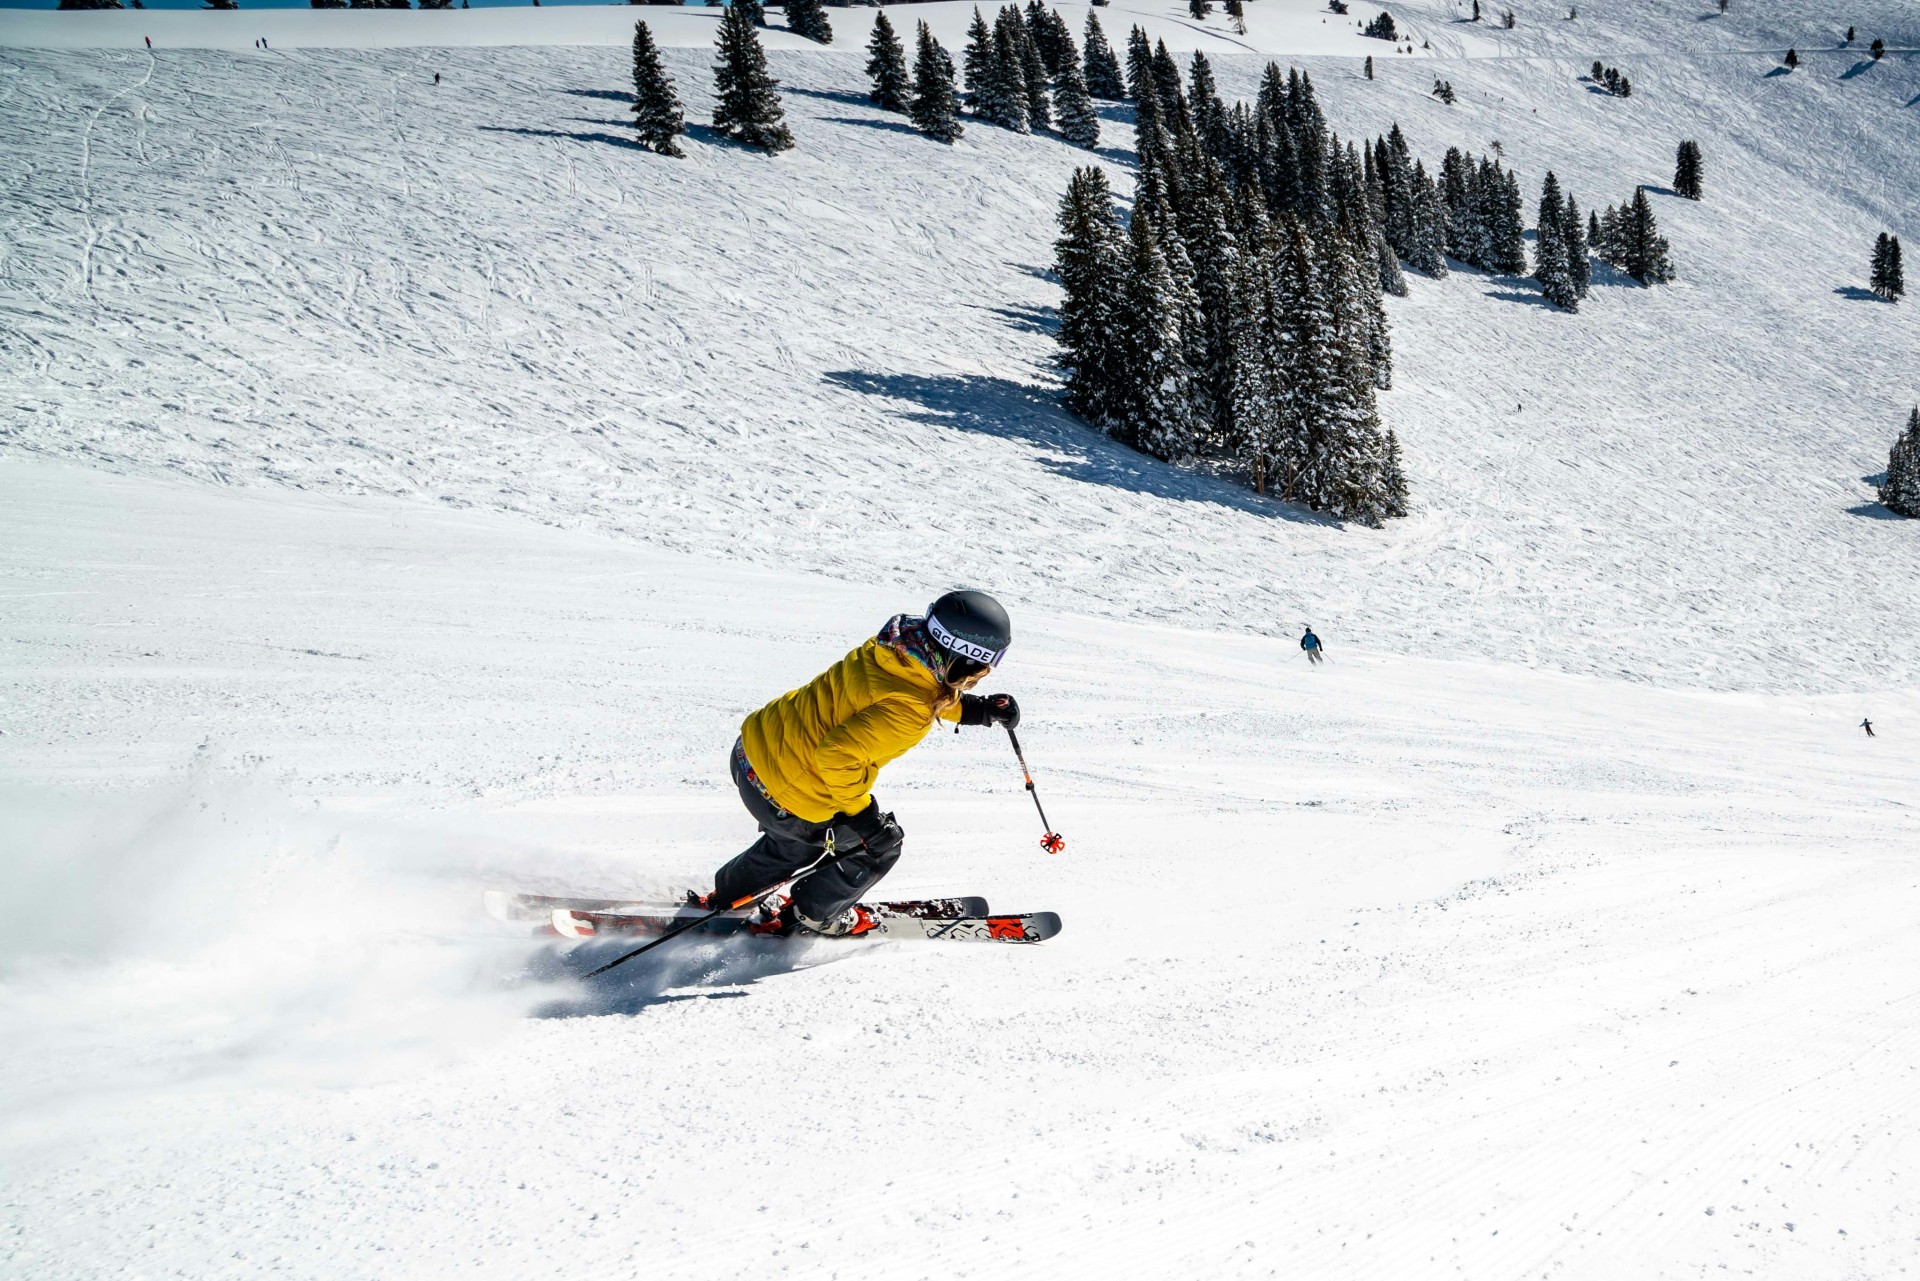 Skier at Vail in a puffy jacket